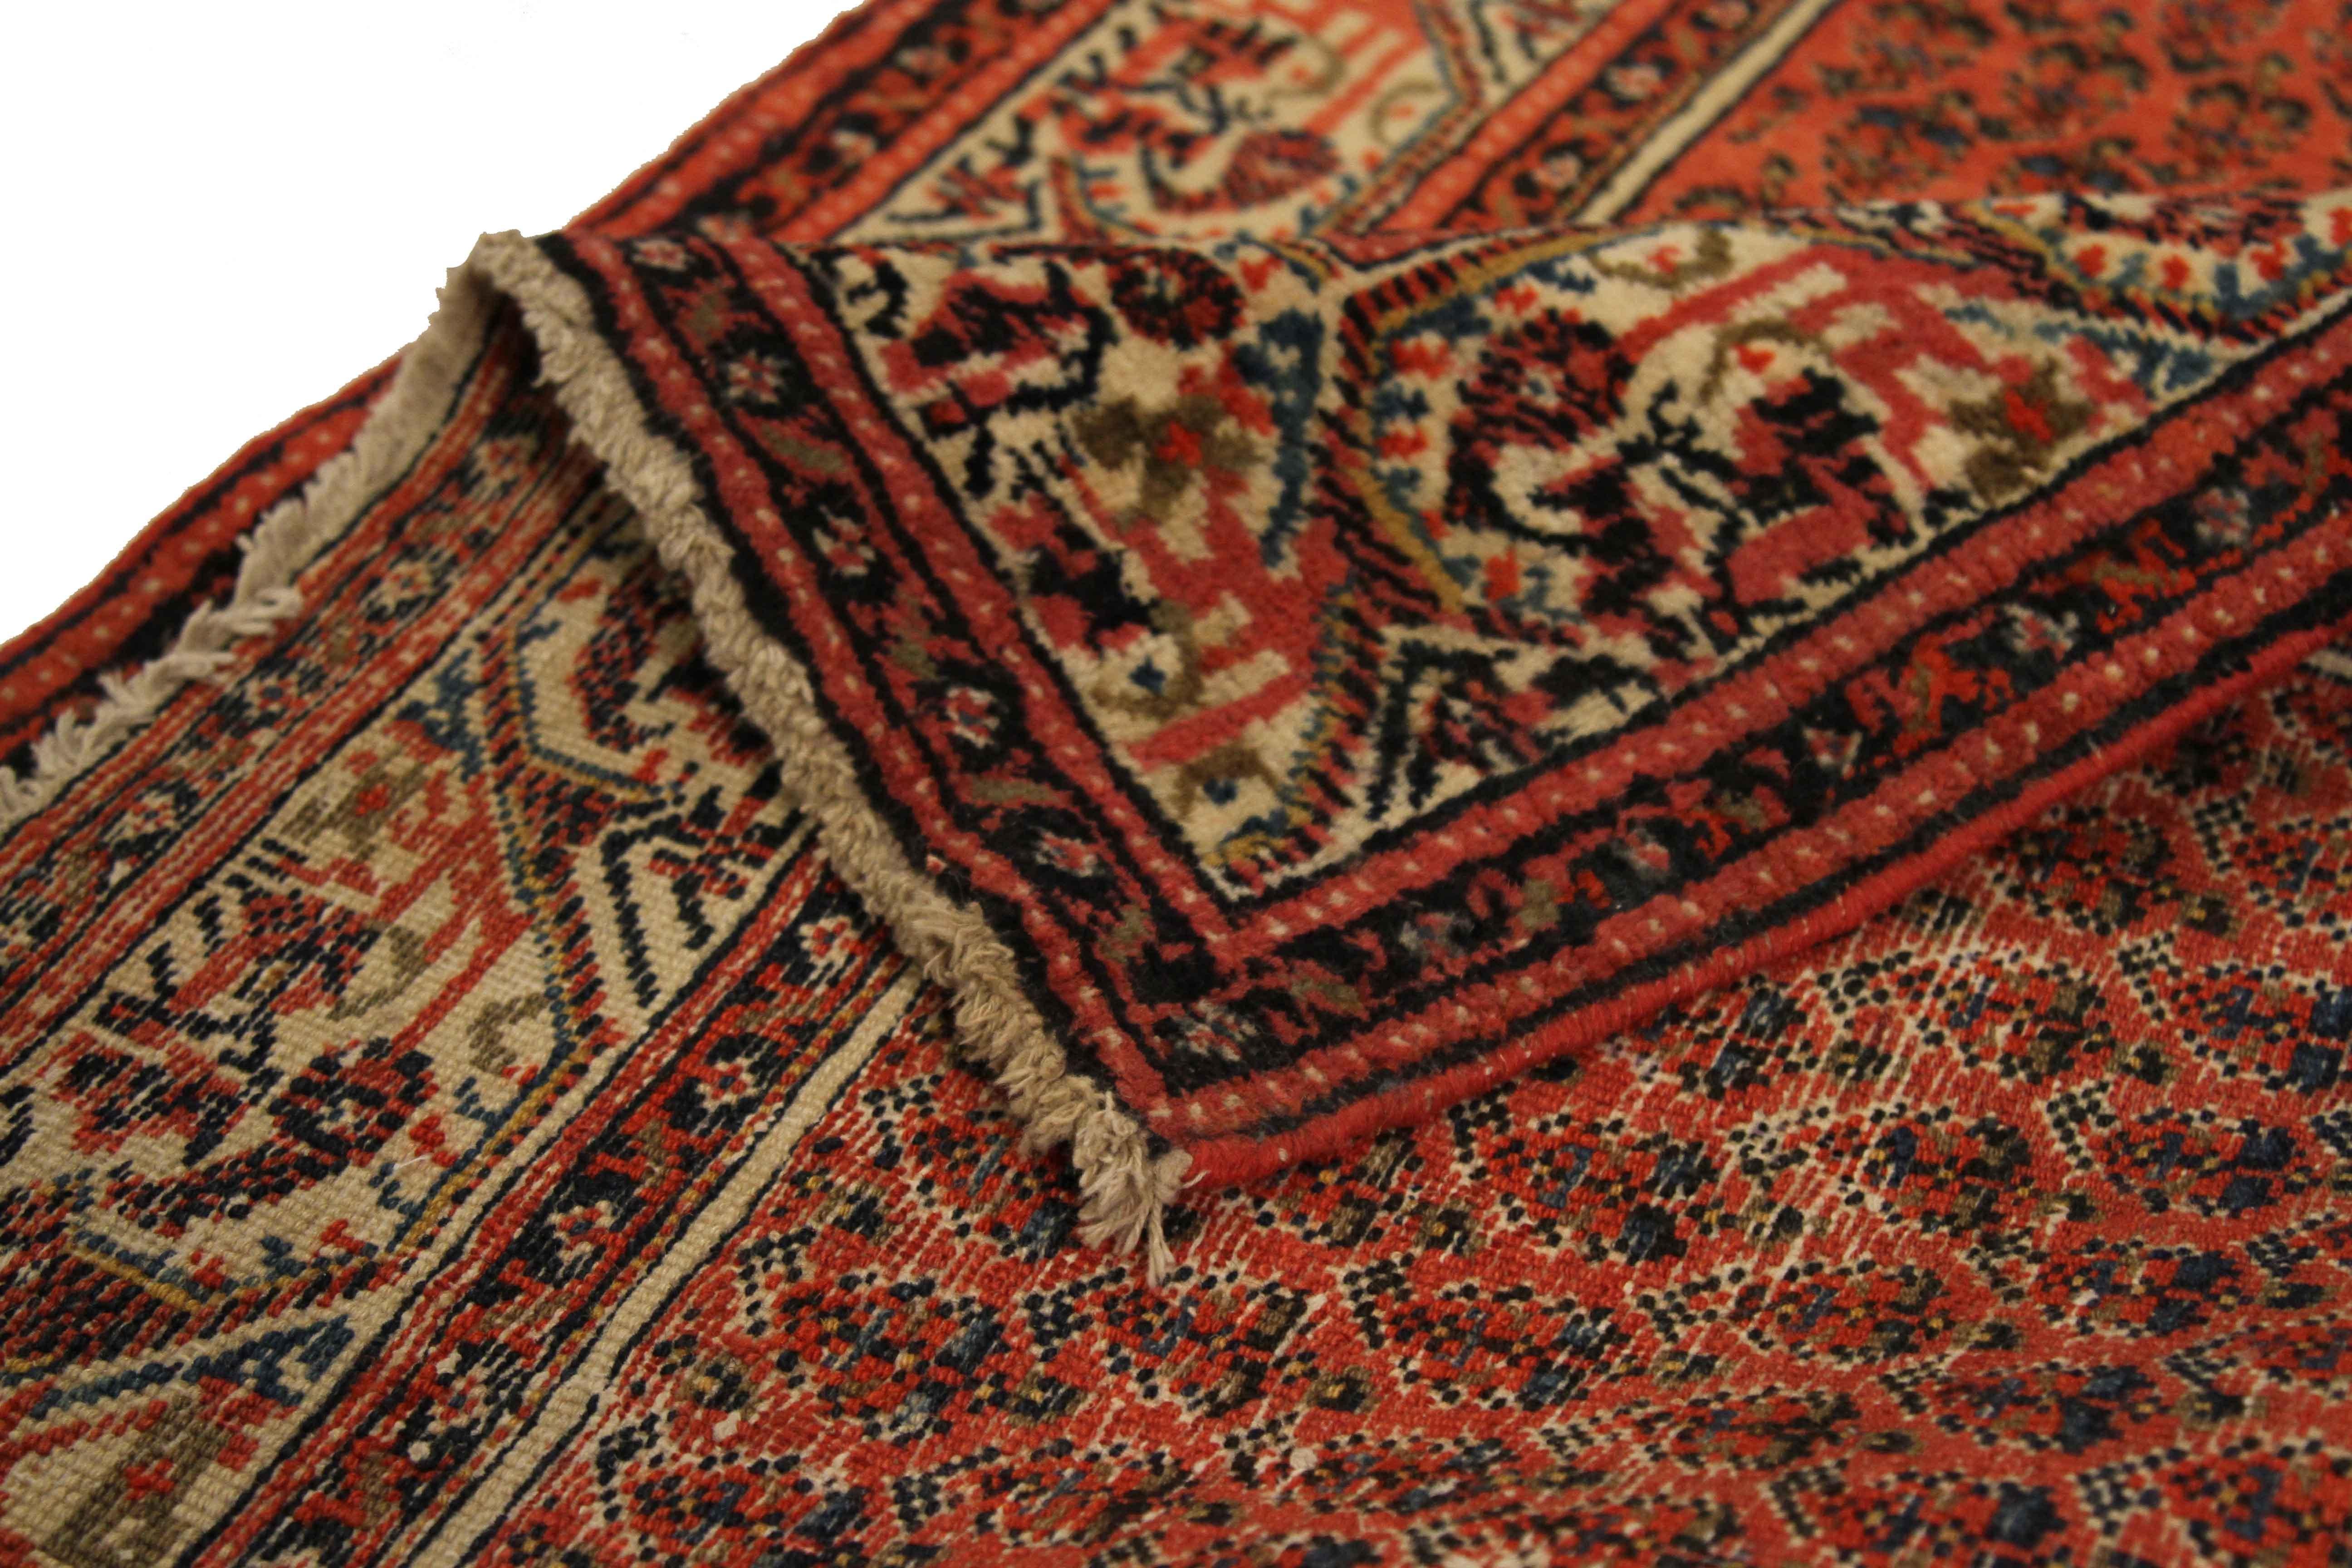 Finely woven by hand using exquisite wool and vibrant vegetable dyes, this antique Persian rug features a wide, open field of ‘boteh’ or leafy patterns popular in Saraband made carpets. Weavers skillfully blended red, black, ivory and blue to make